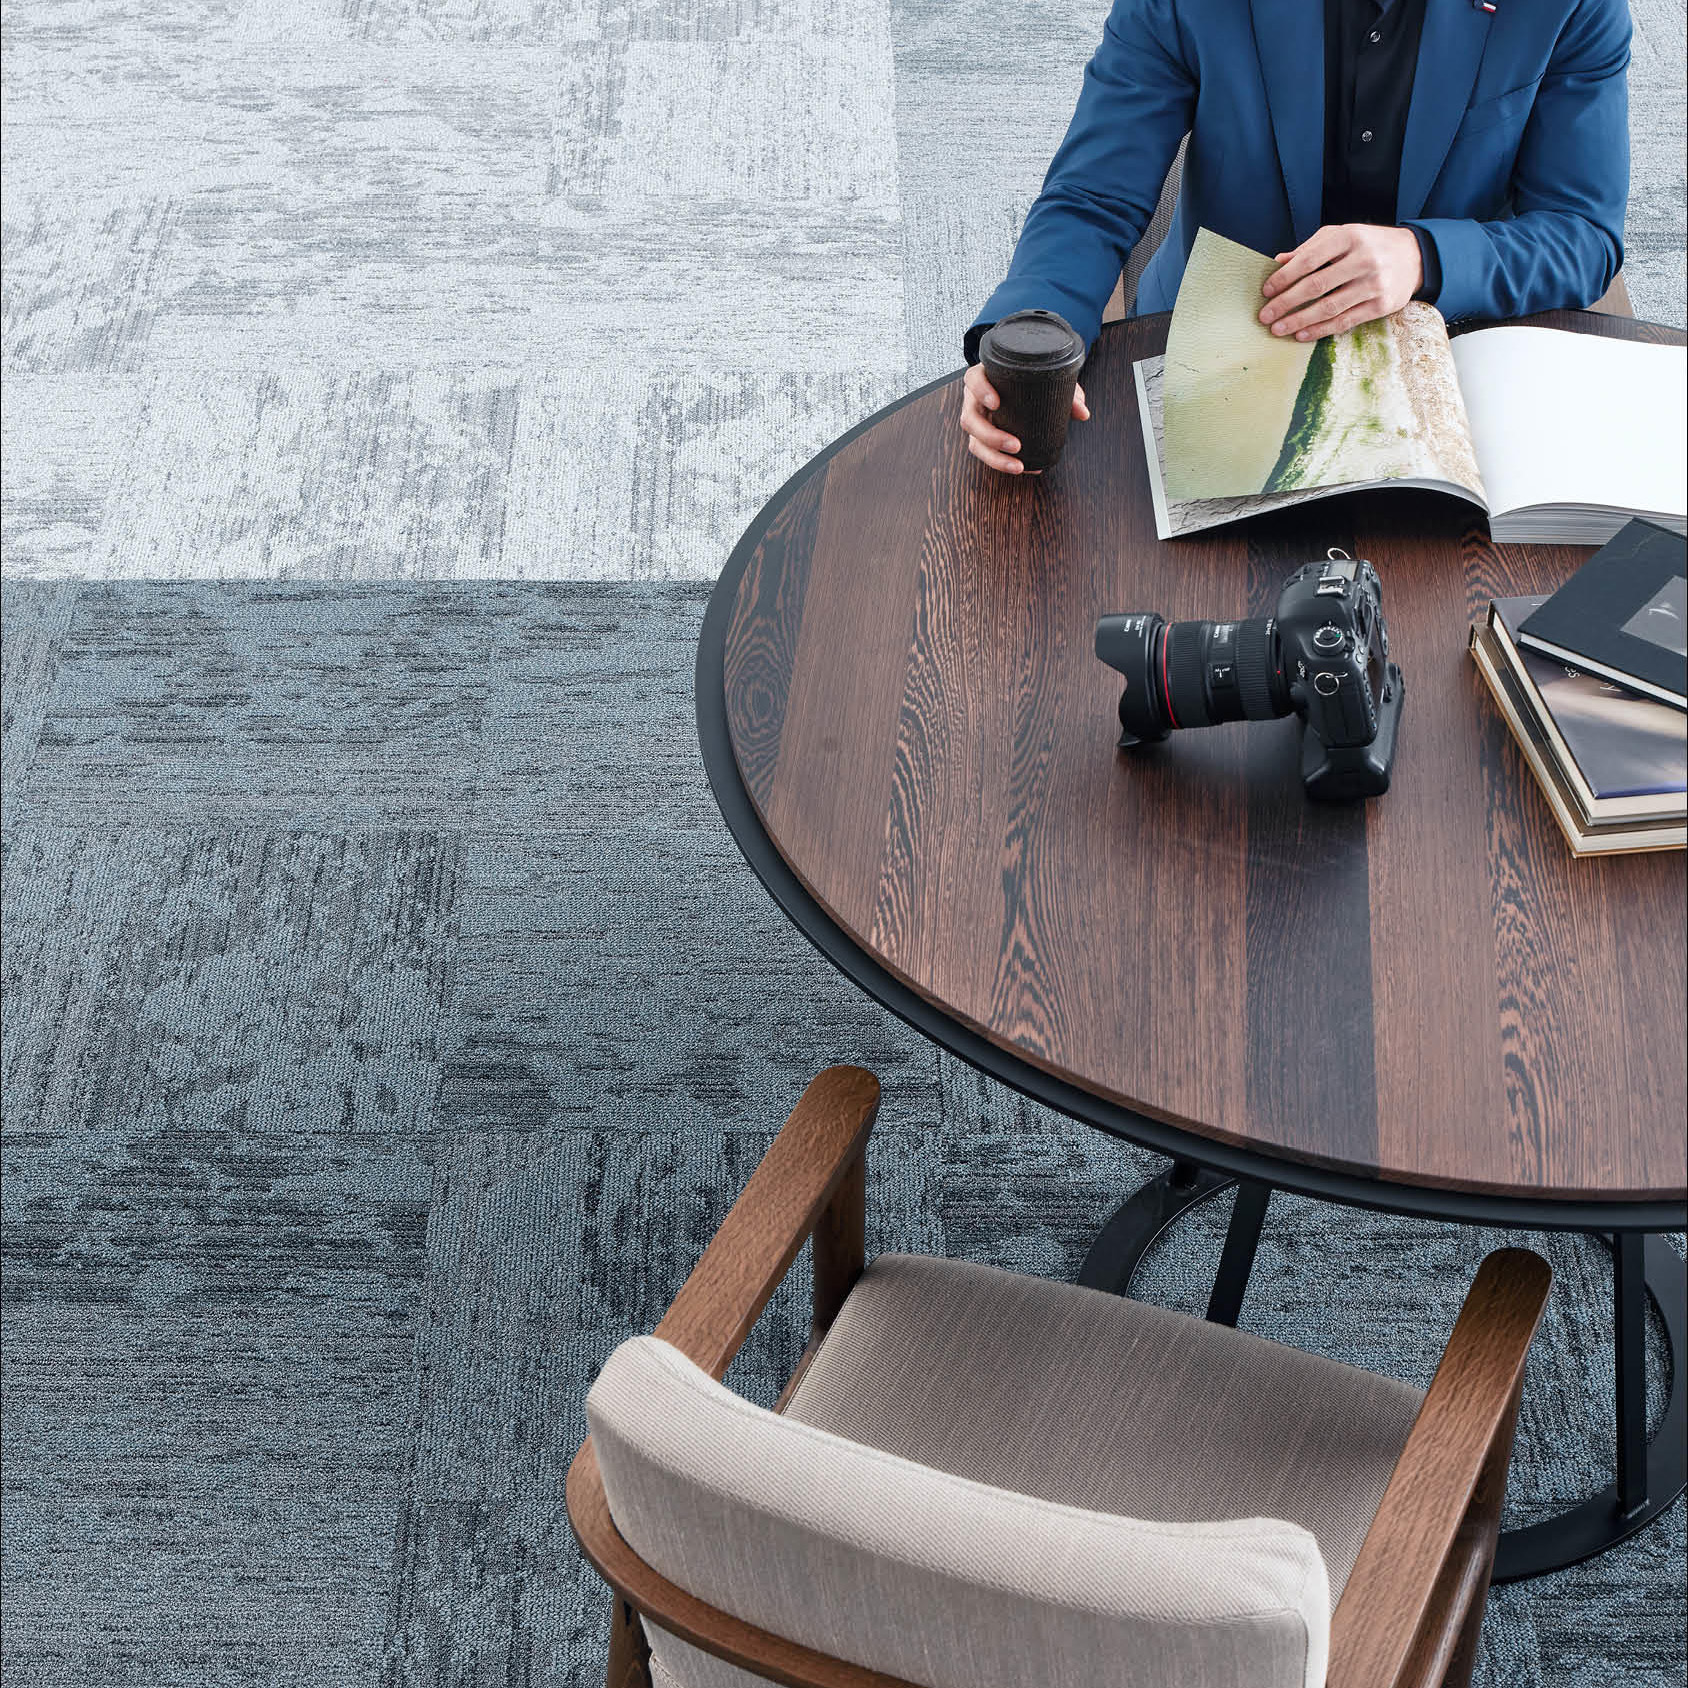 Desso Breccia Carpet Tile used for commercial office space with man reading brochure